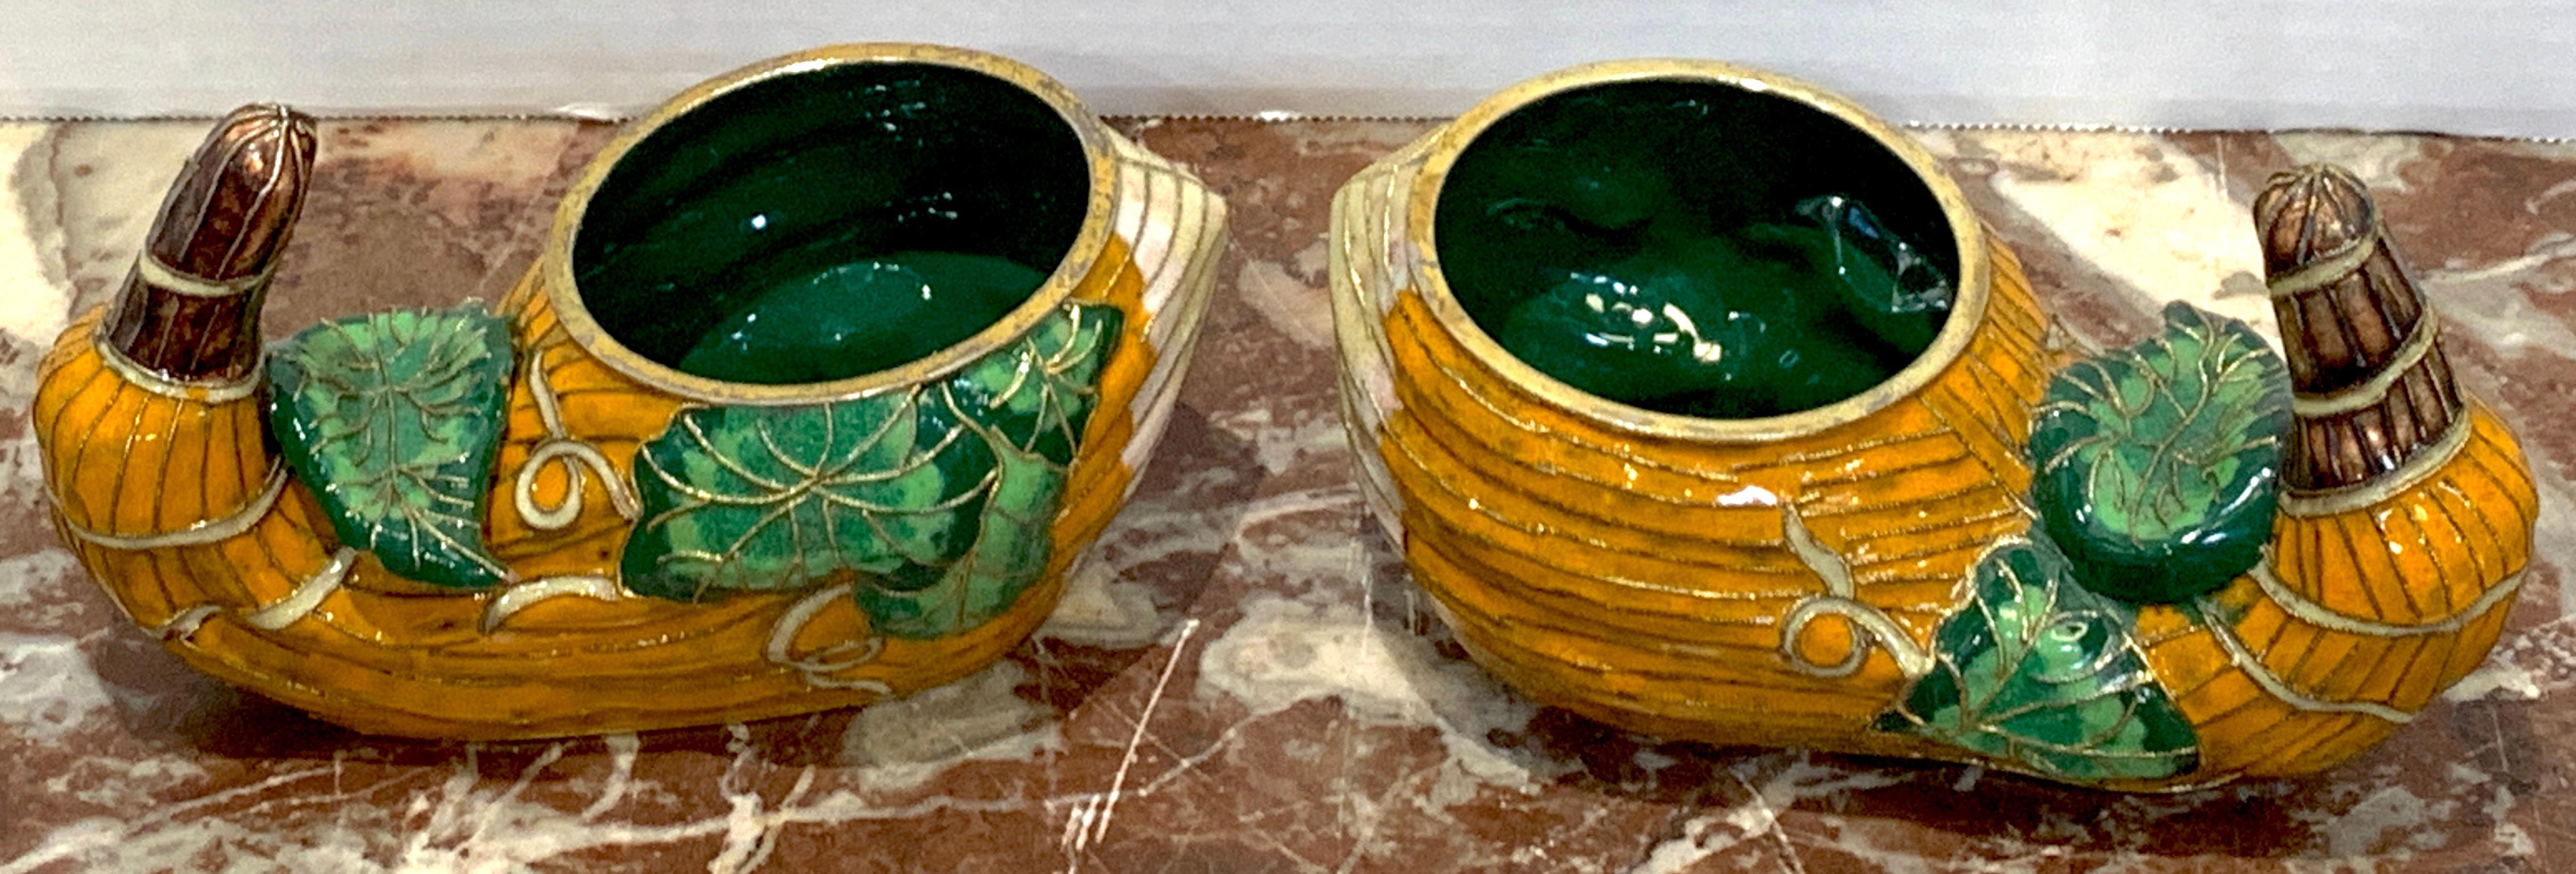 Pair of Chinese Export Enamel Gourd Cachepots In Good Condition For Sale In West Palm Beach, FL